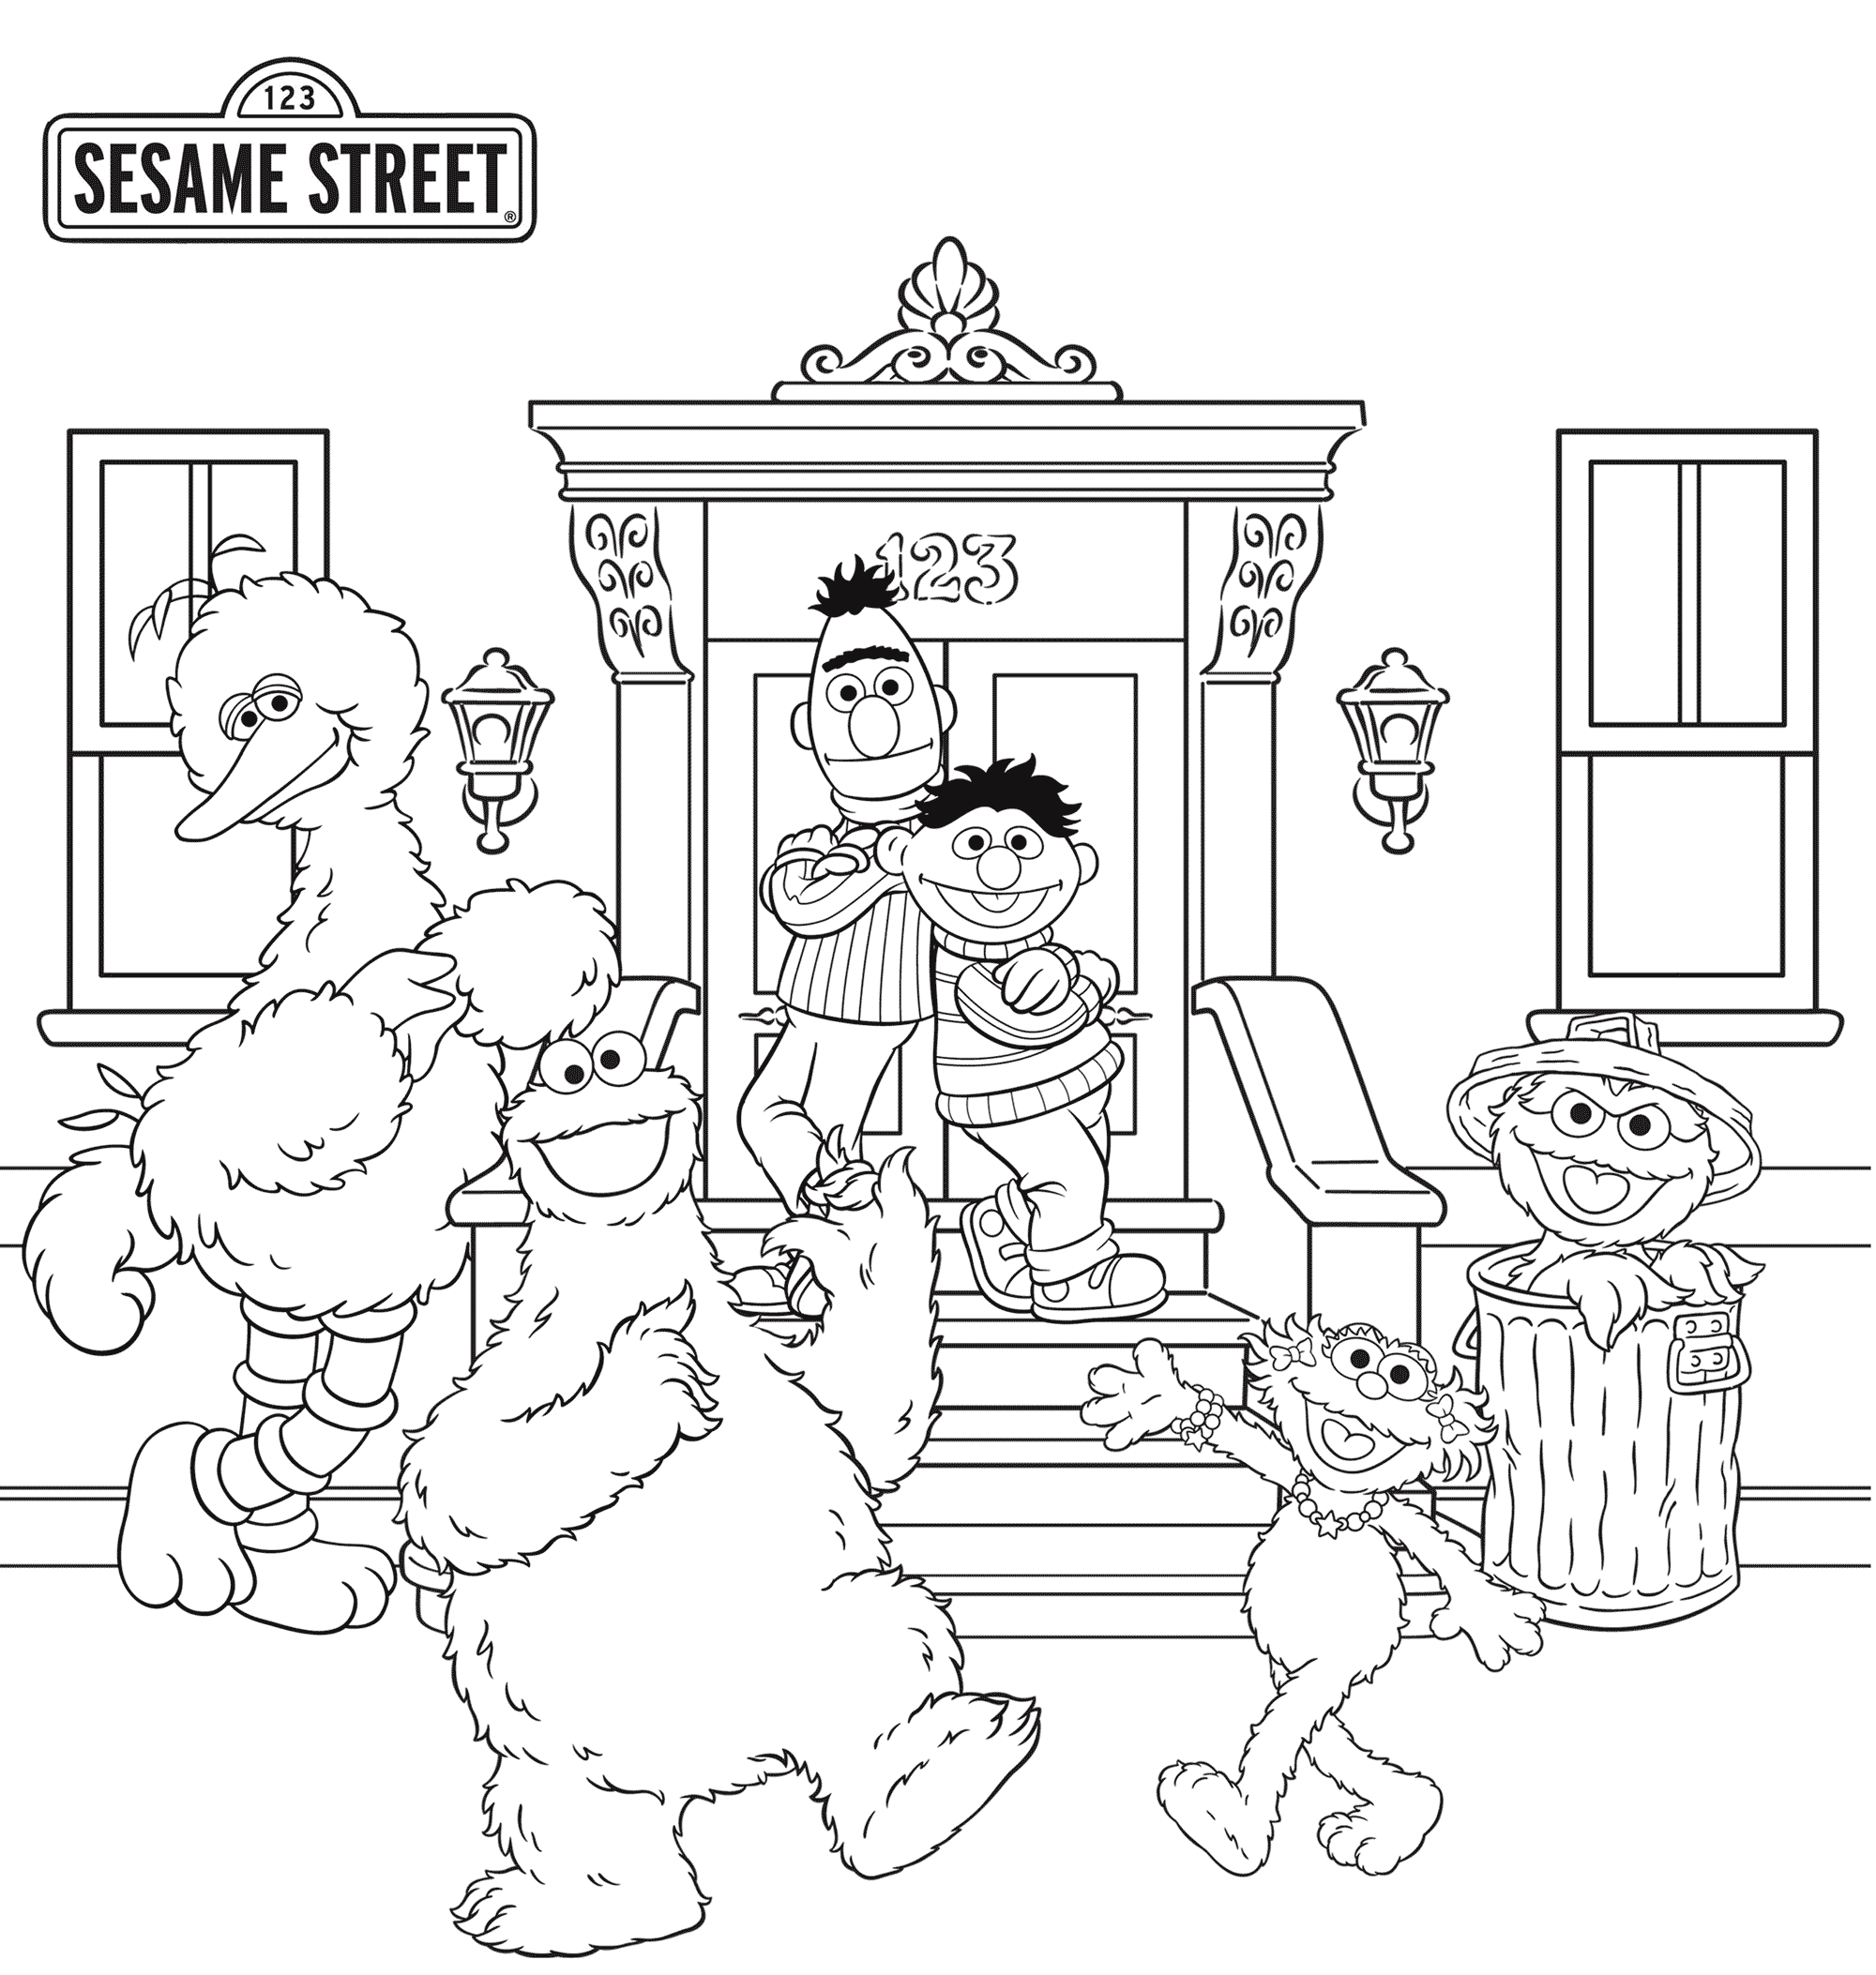 21 fresh pict sesame street characters coloring pages sesame street